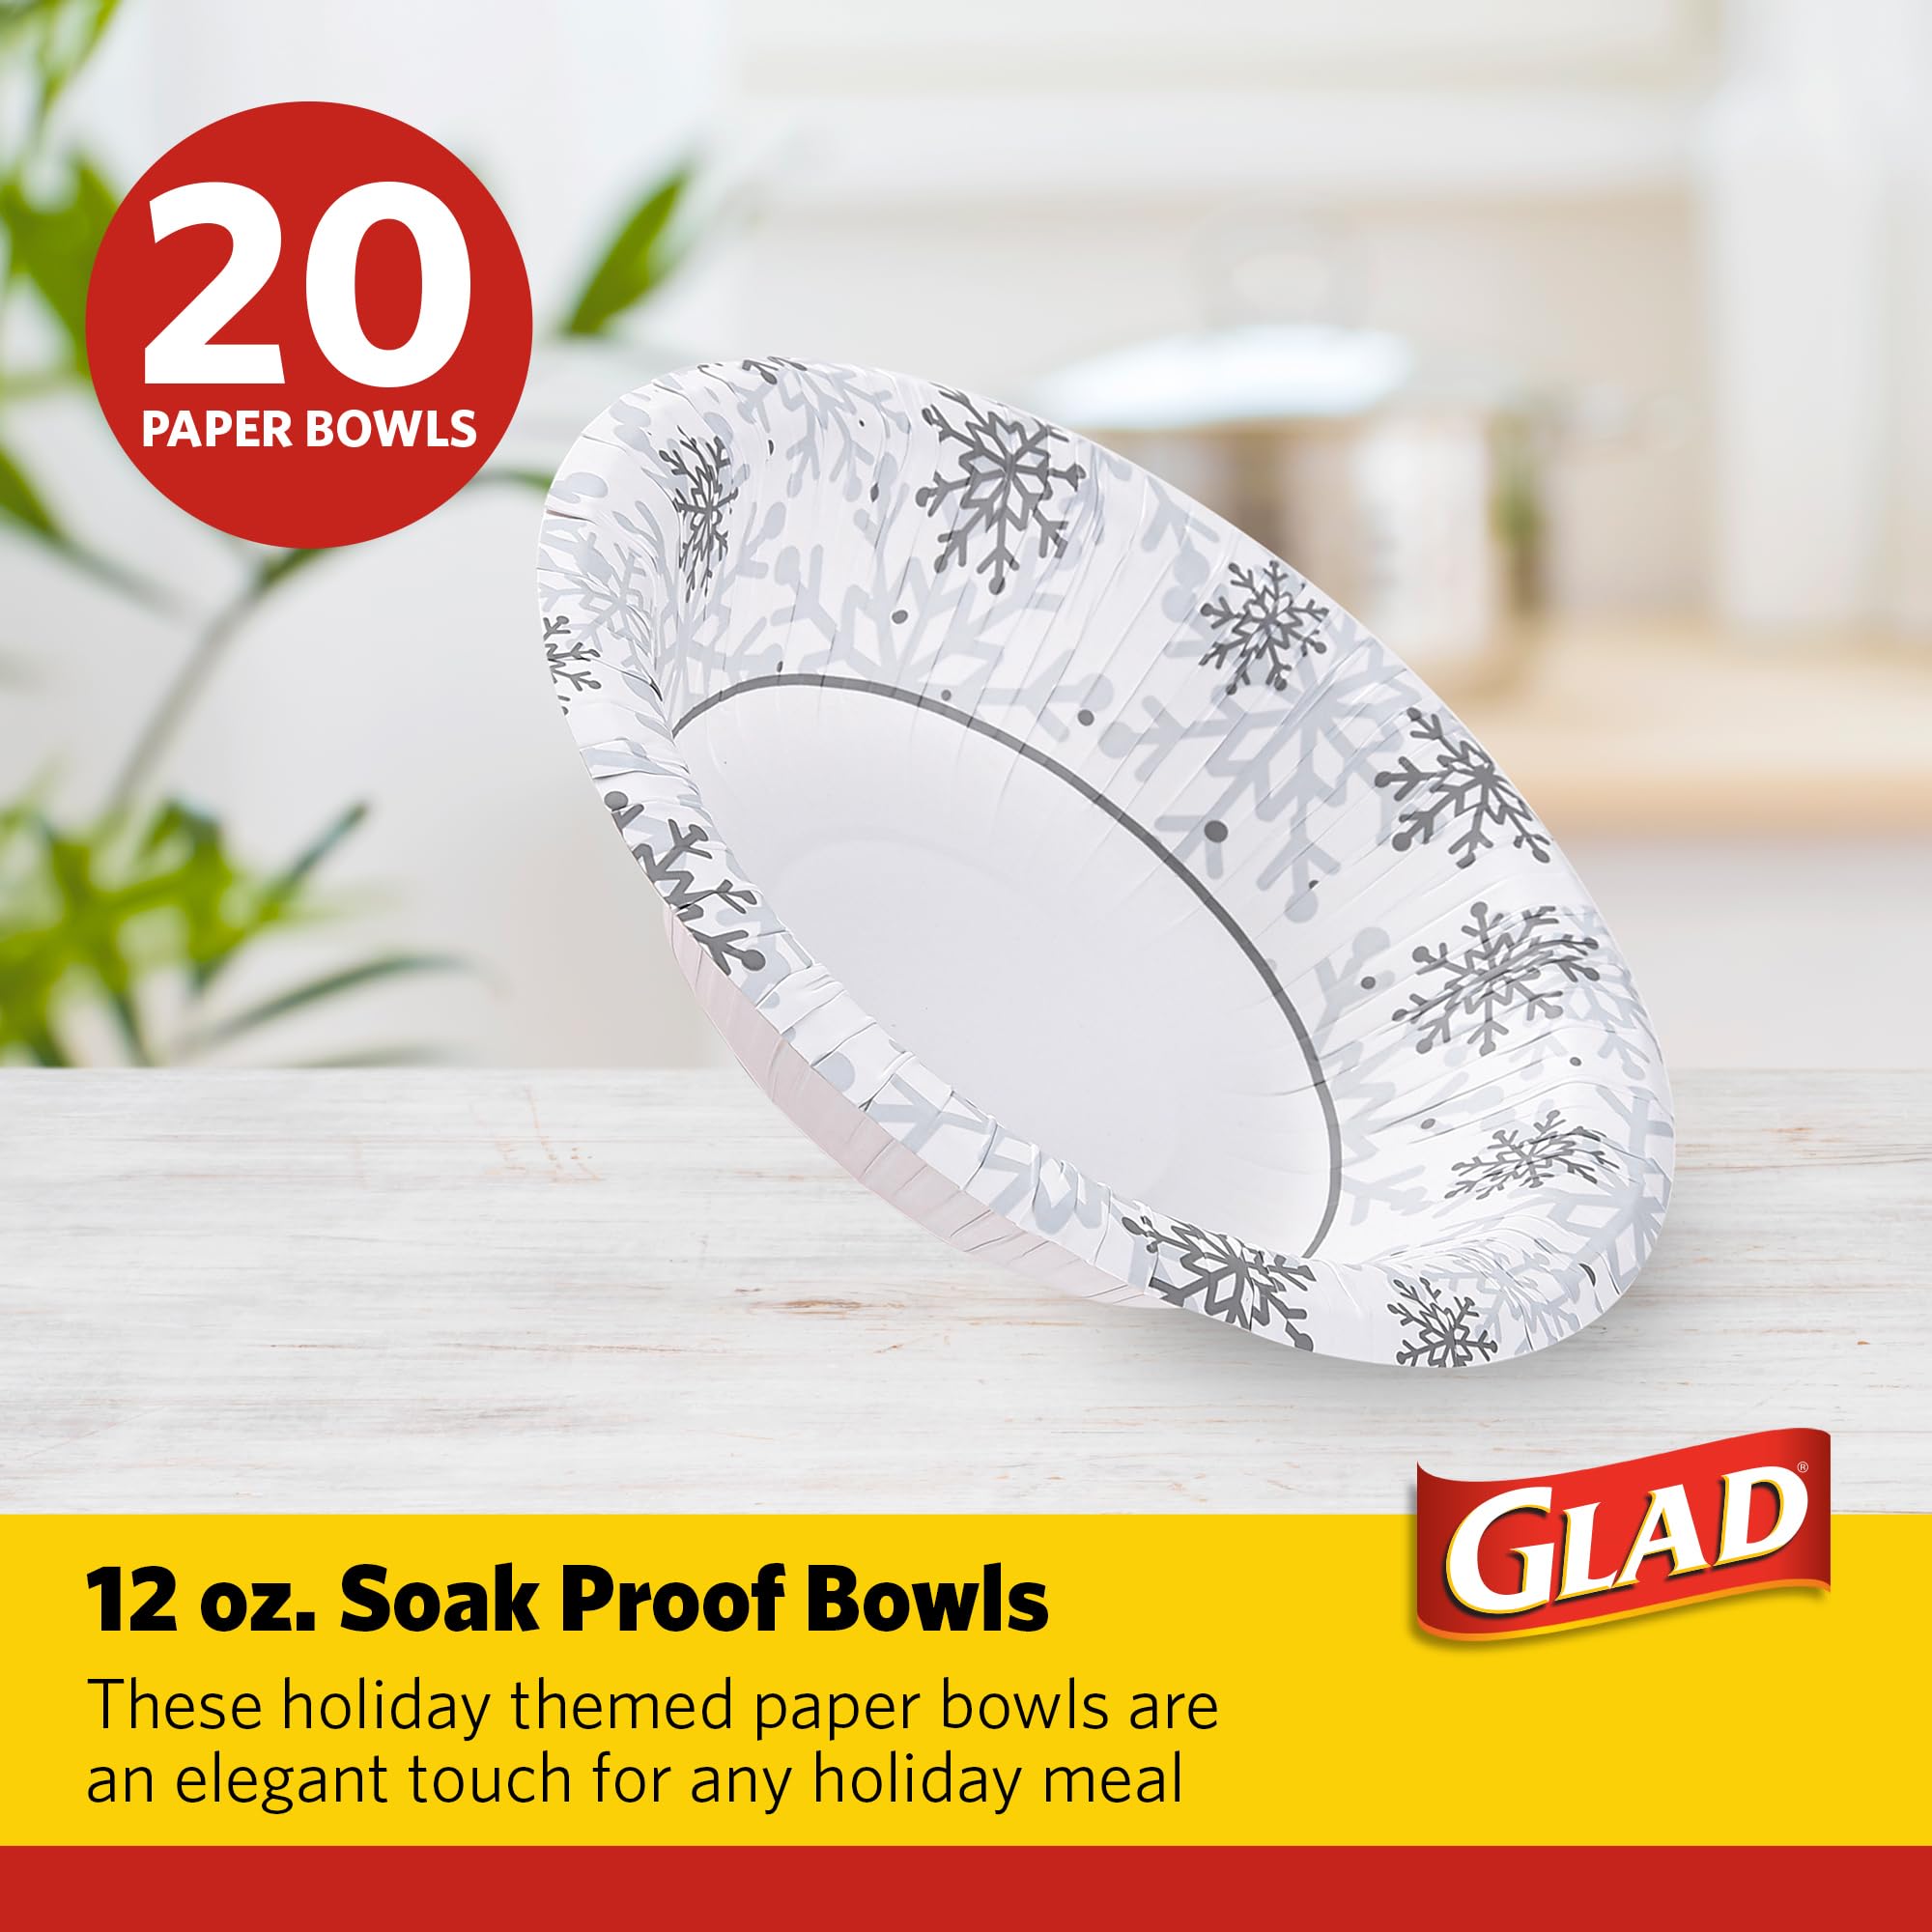 Glad Everyday Disposable Paper Bowls with Holiday Gray Snowflake Design | Heavy Duty Paper Bowls, Microwavable Paper Bowls for Everyday Use | Red Snowflake Holiday Design | 12 Ounces, 20 Count